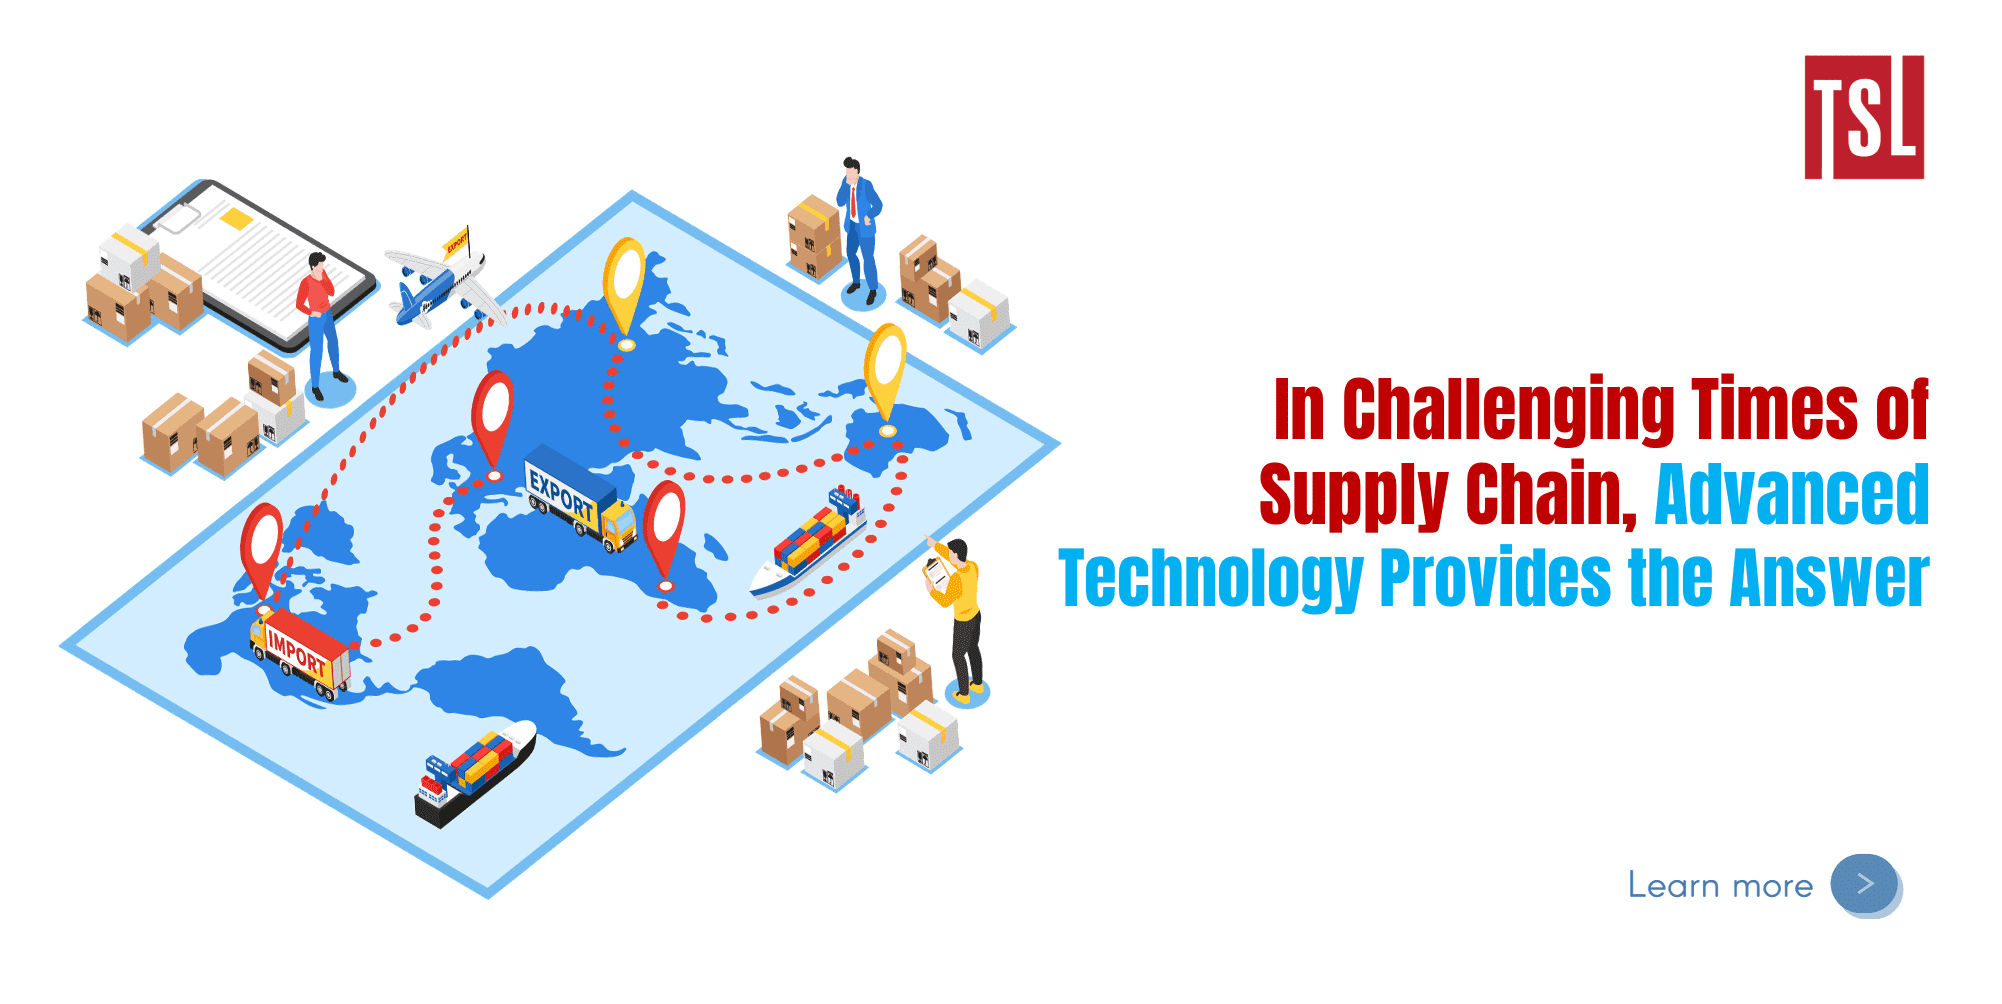 In Challenging Times of Supply Chain, Advanced Technology Provides the Answer